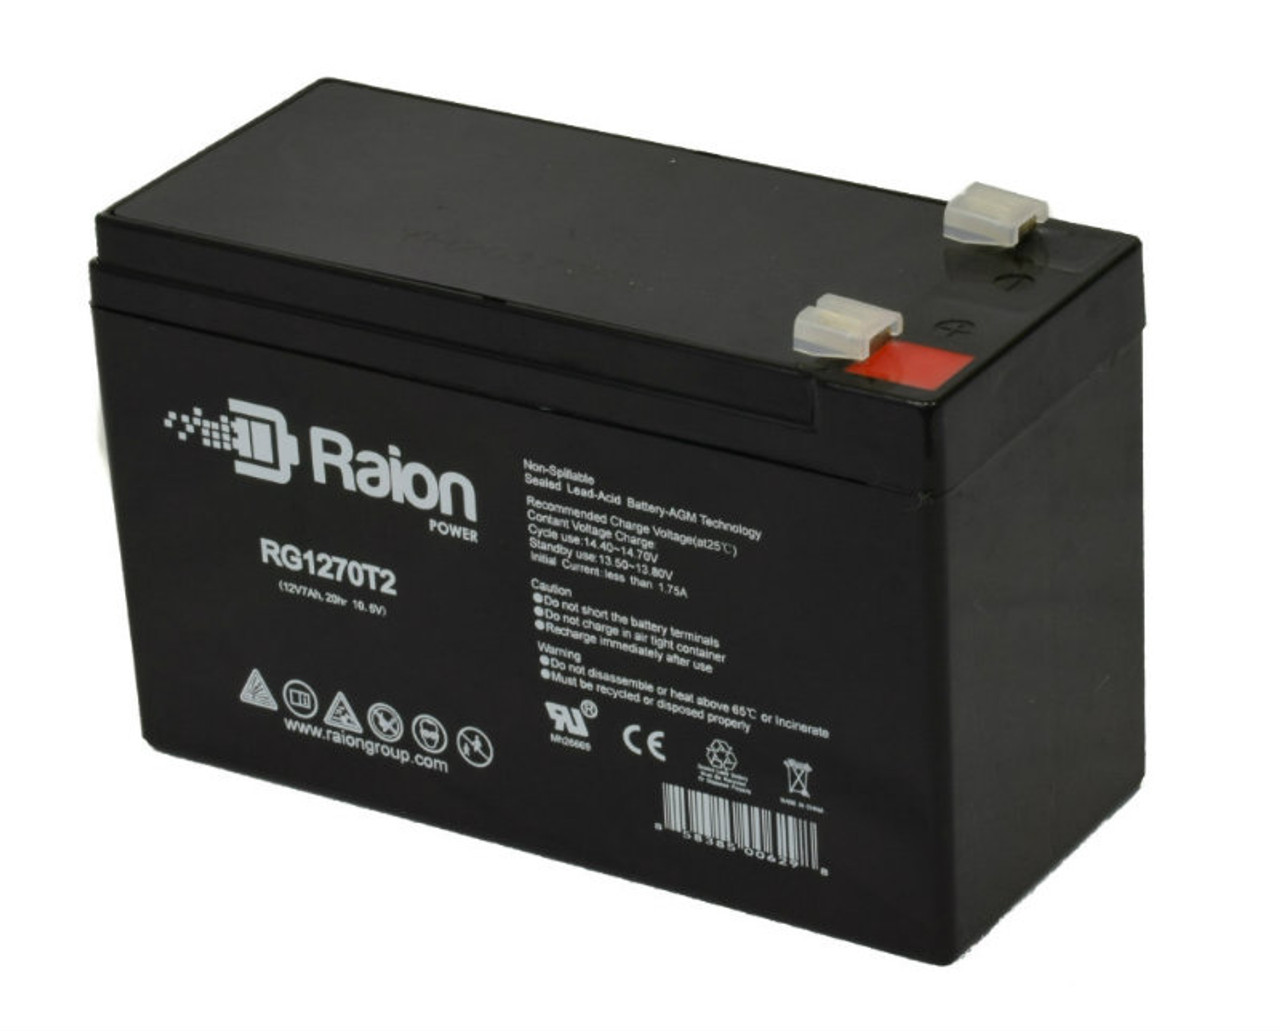 Raion Power Replacement 12V 7Ah RG1270T1 Fire Alarm Battery for ADI 5140XM